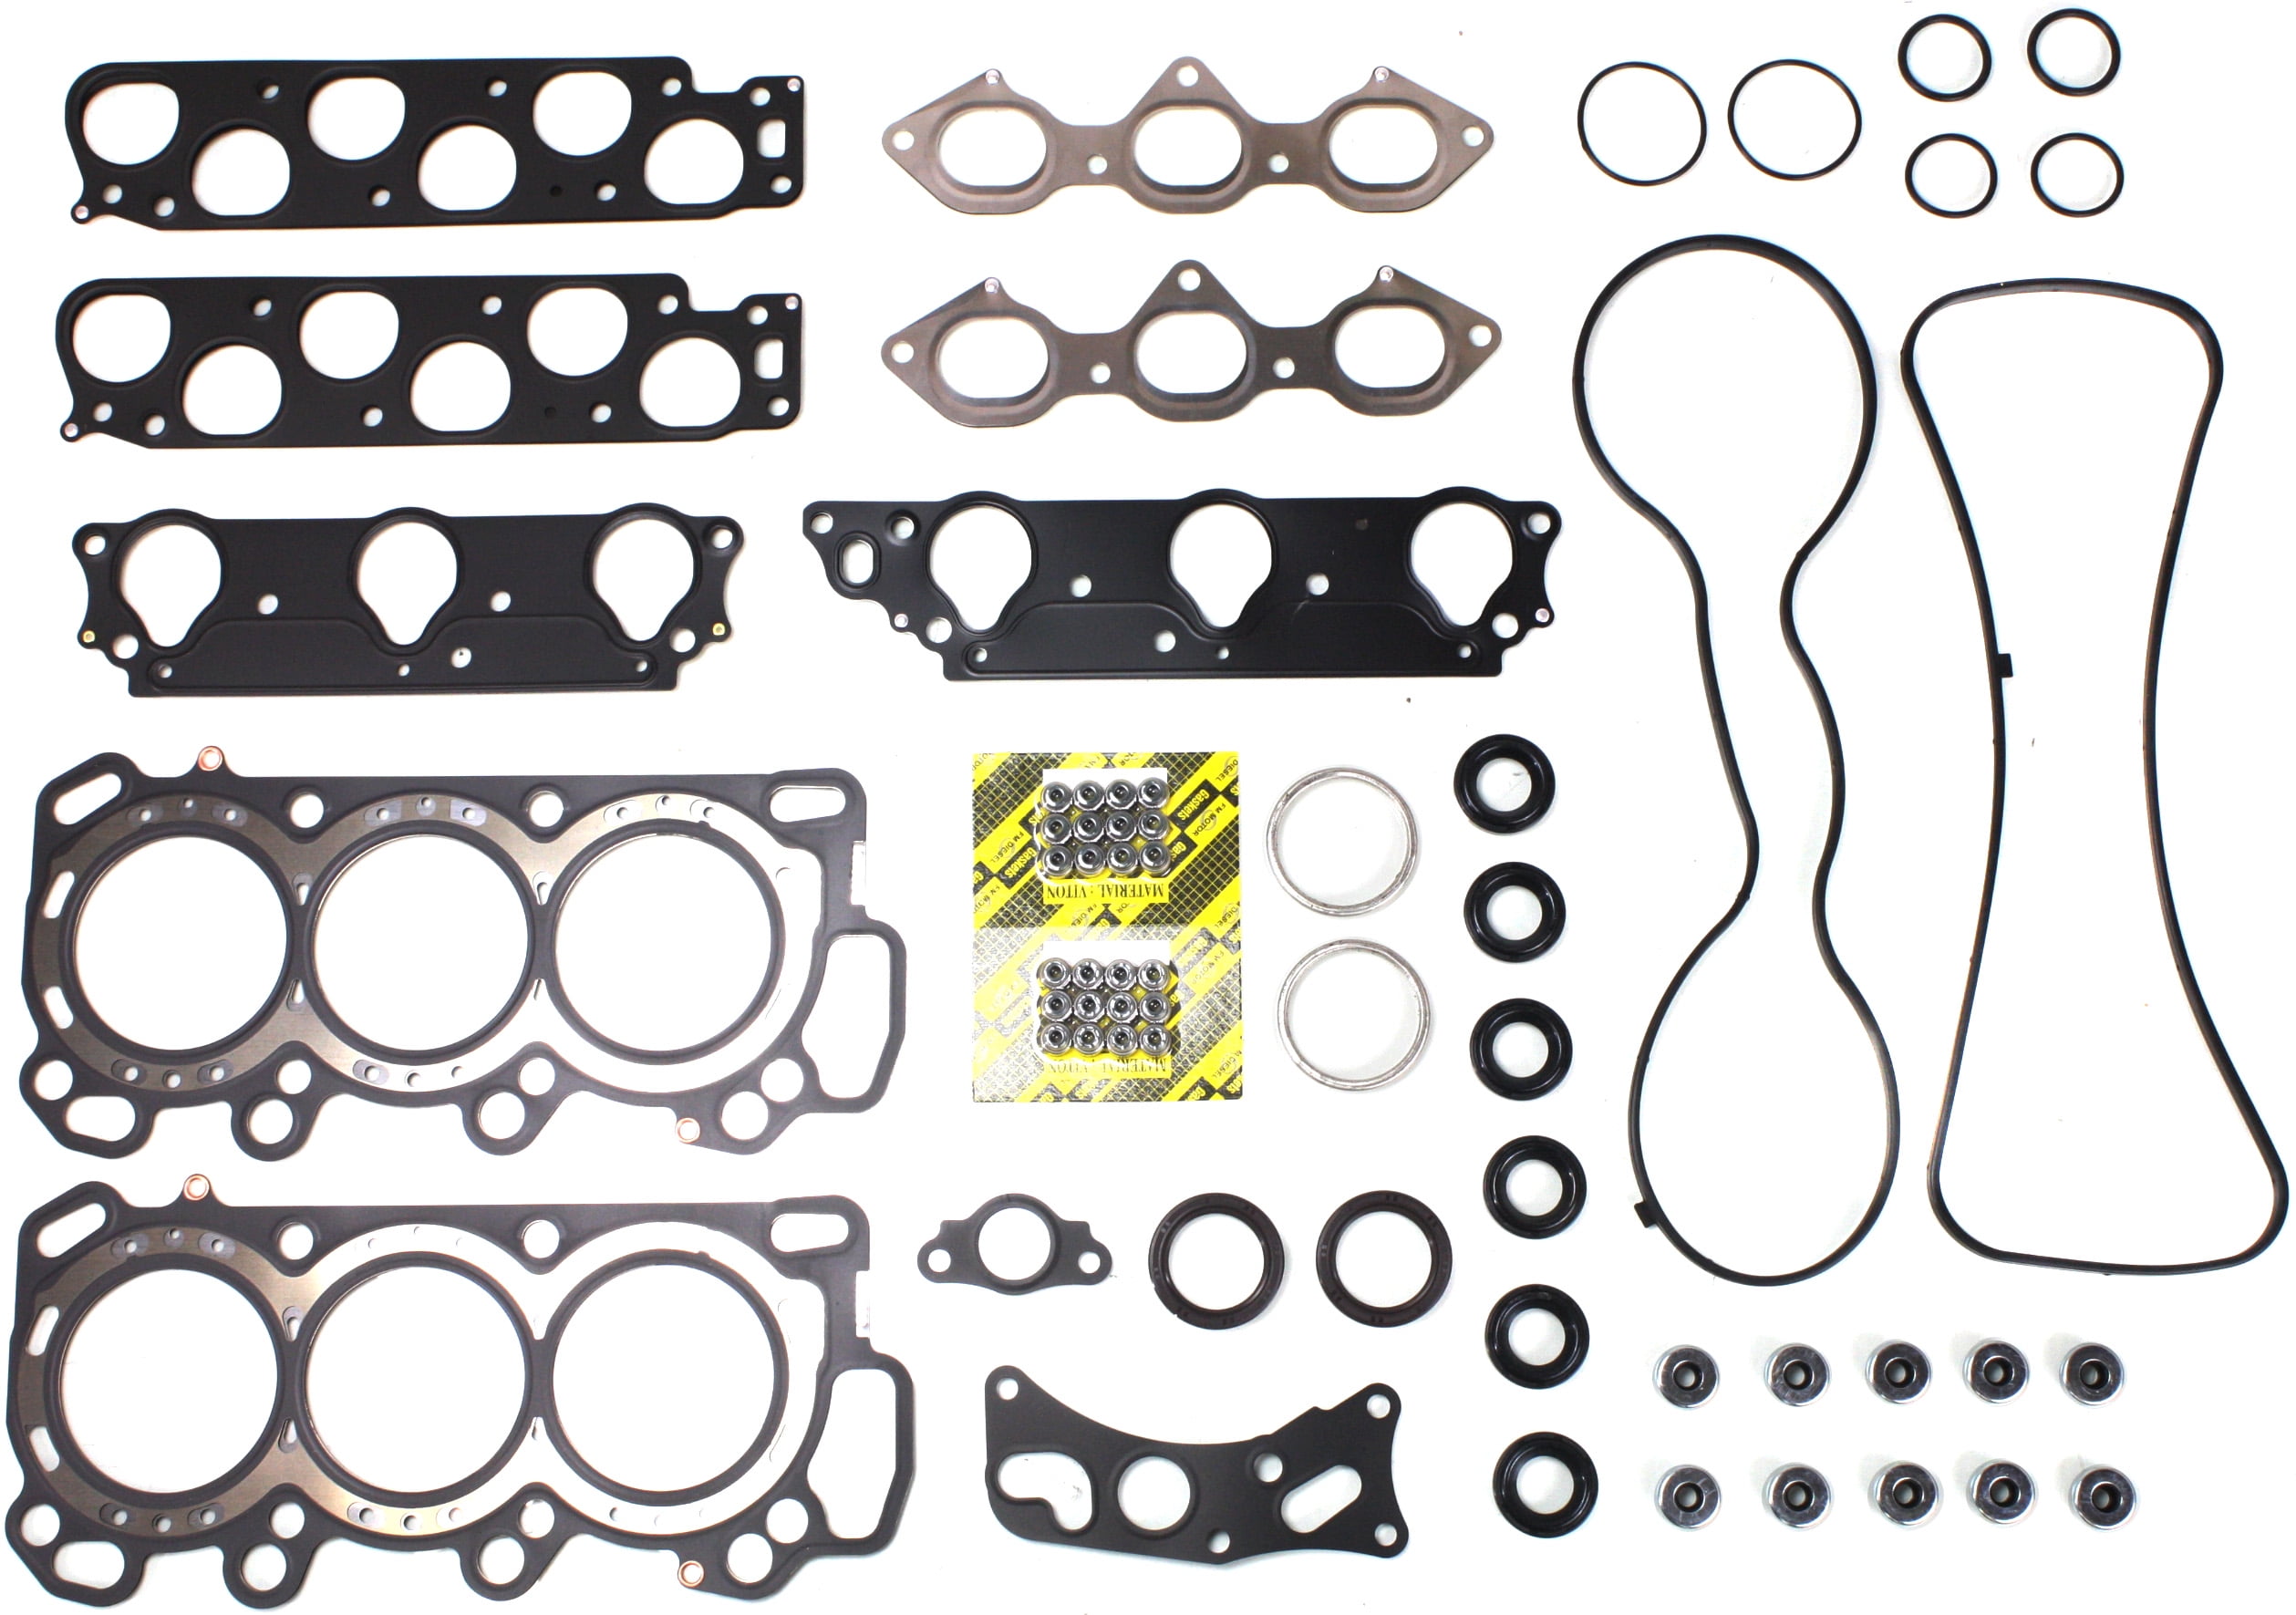 Head Gasket Set Compatible with 1998-2002 Honda Accord 1997-1999 Acura CL  6Cyl 3.0L